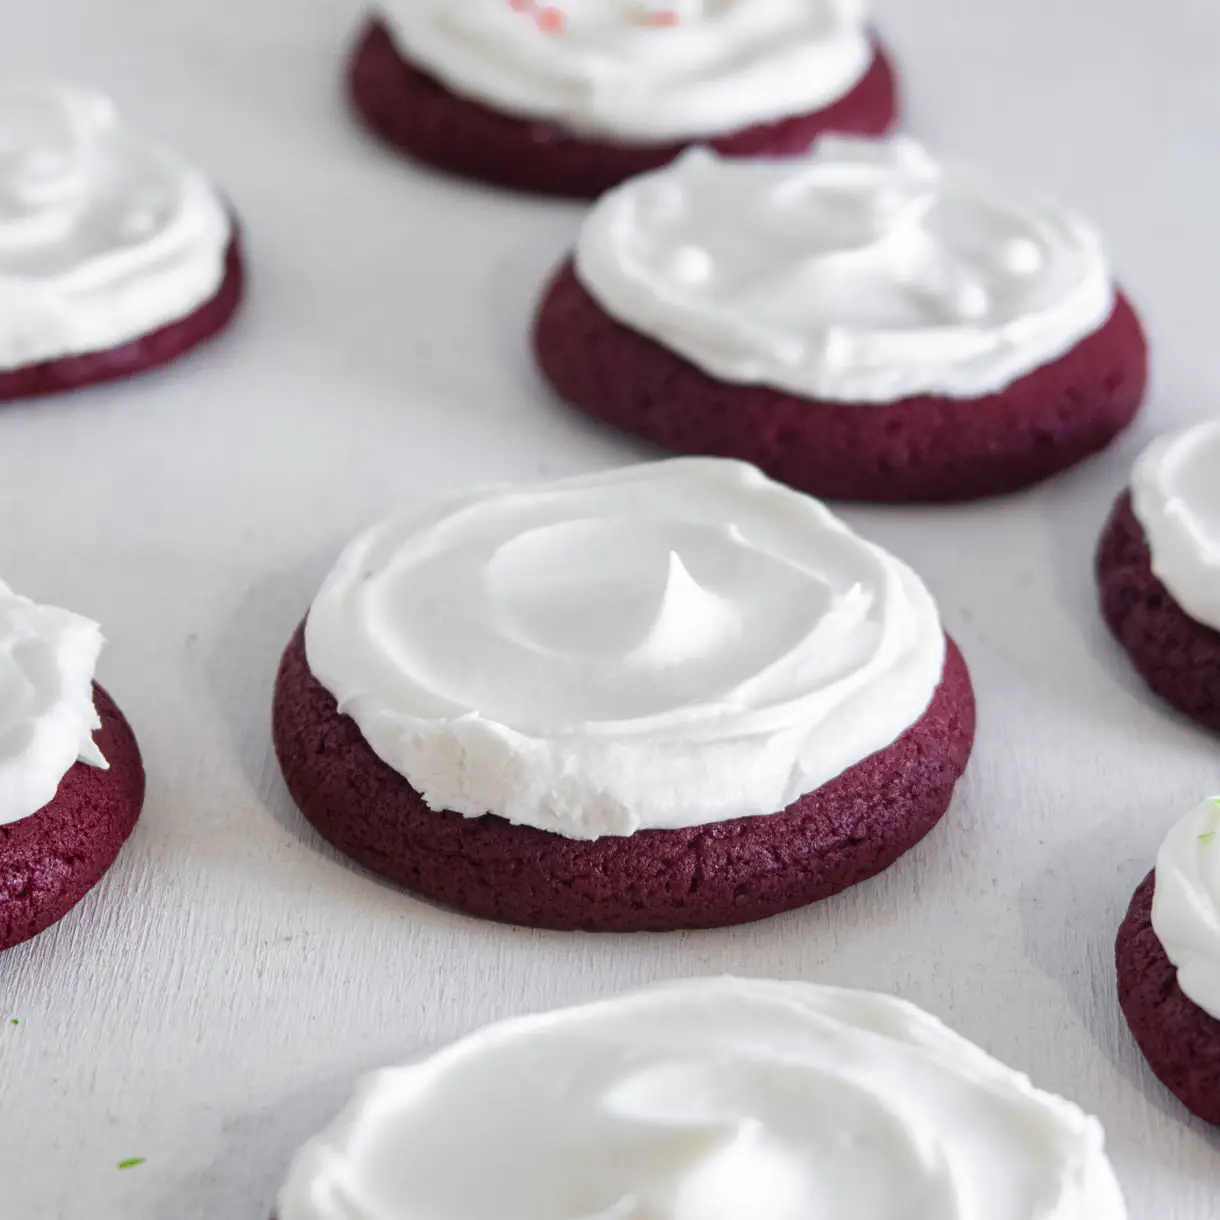 An assortment of vegan red velvet lofthouse-style cookies iced with cream cheese icing on a white background.